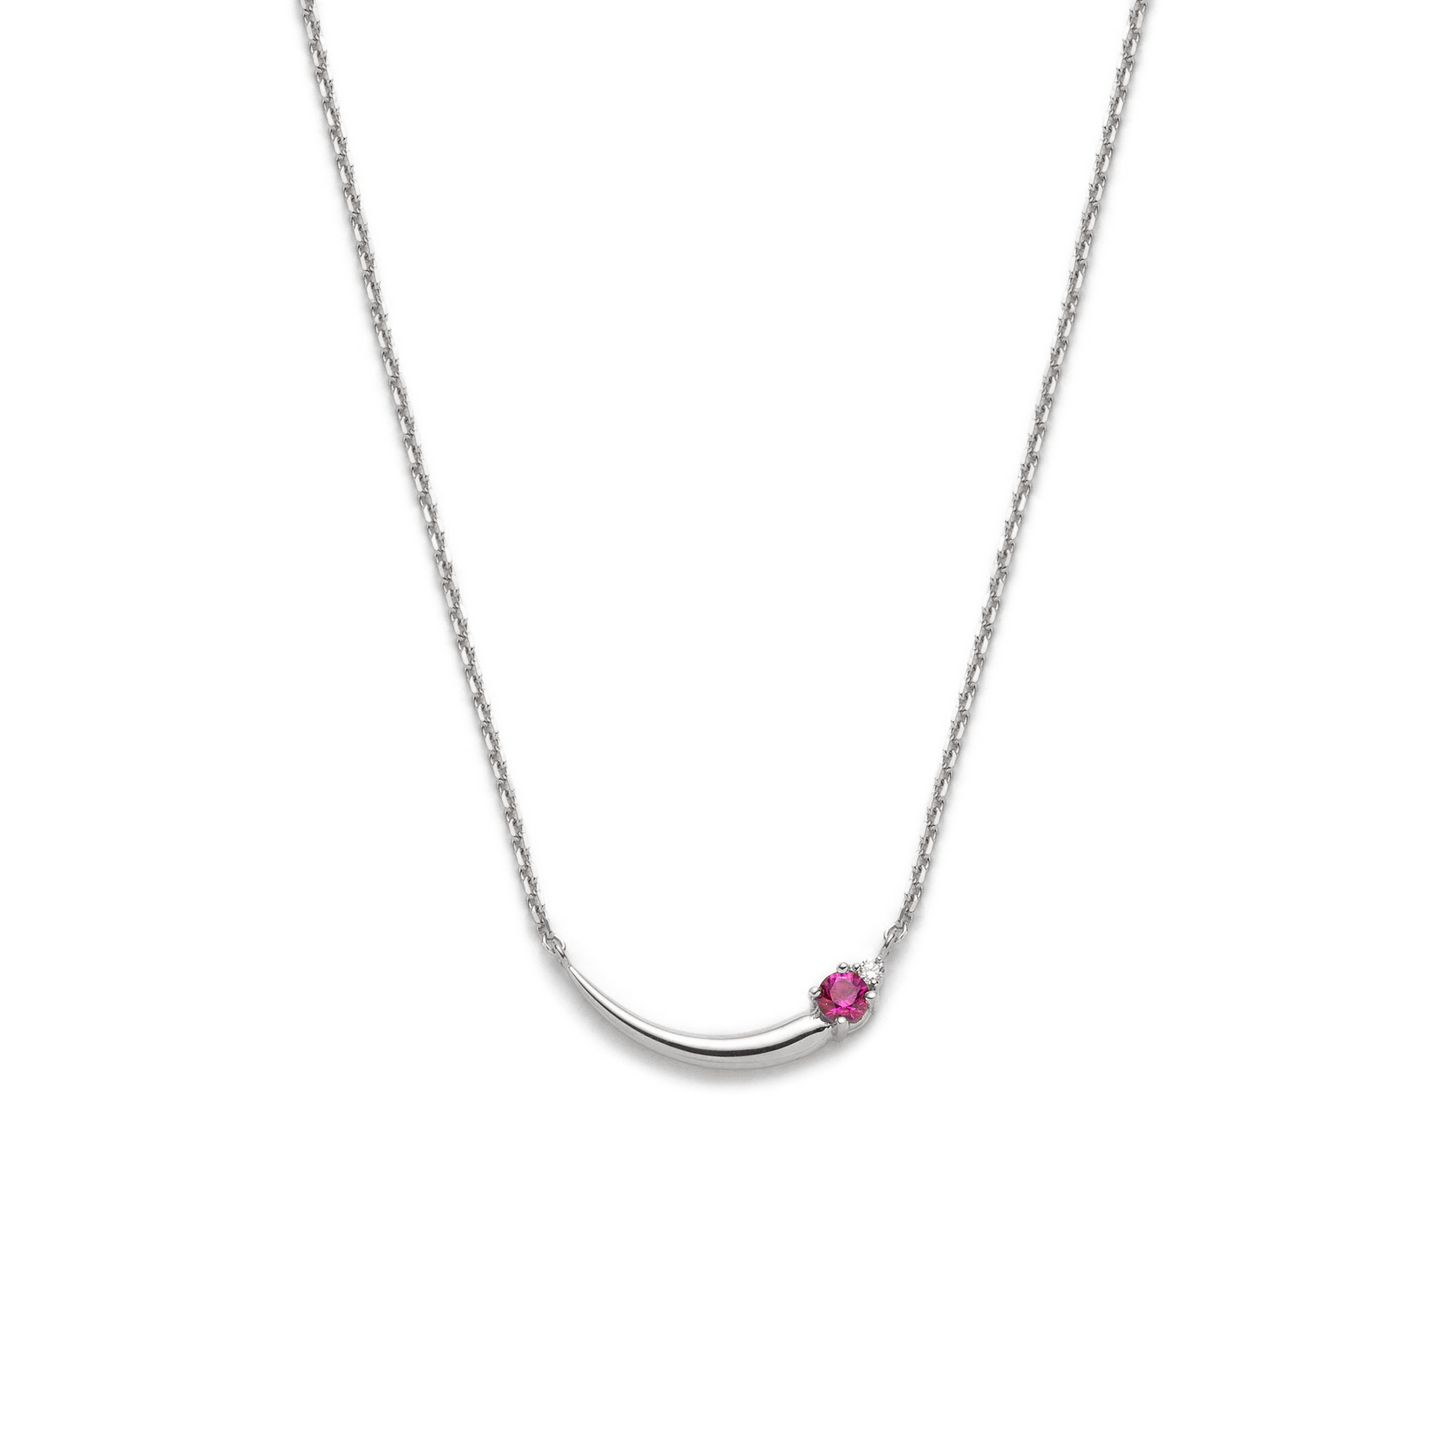 Spiked Toi & Moi Pink Tourmaline and Diamond Necklace